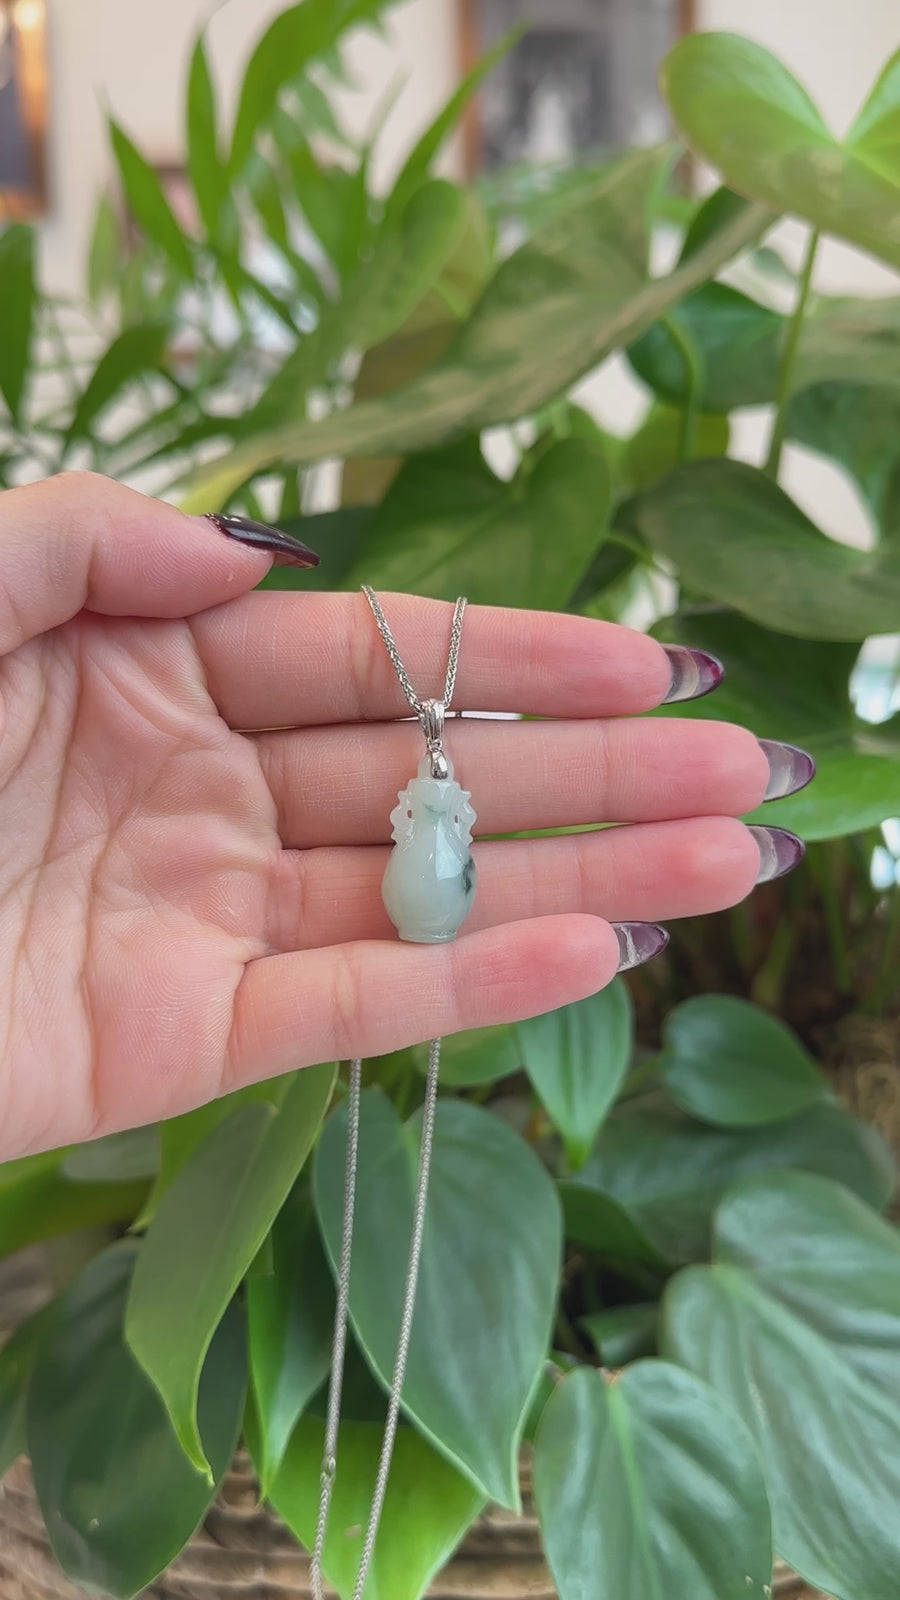 Natural Unique Jadeite Jade Lucky Bottle Necklace with 14k White Gold Bail